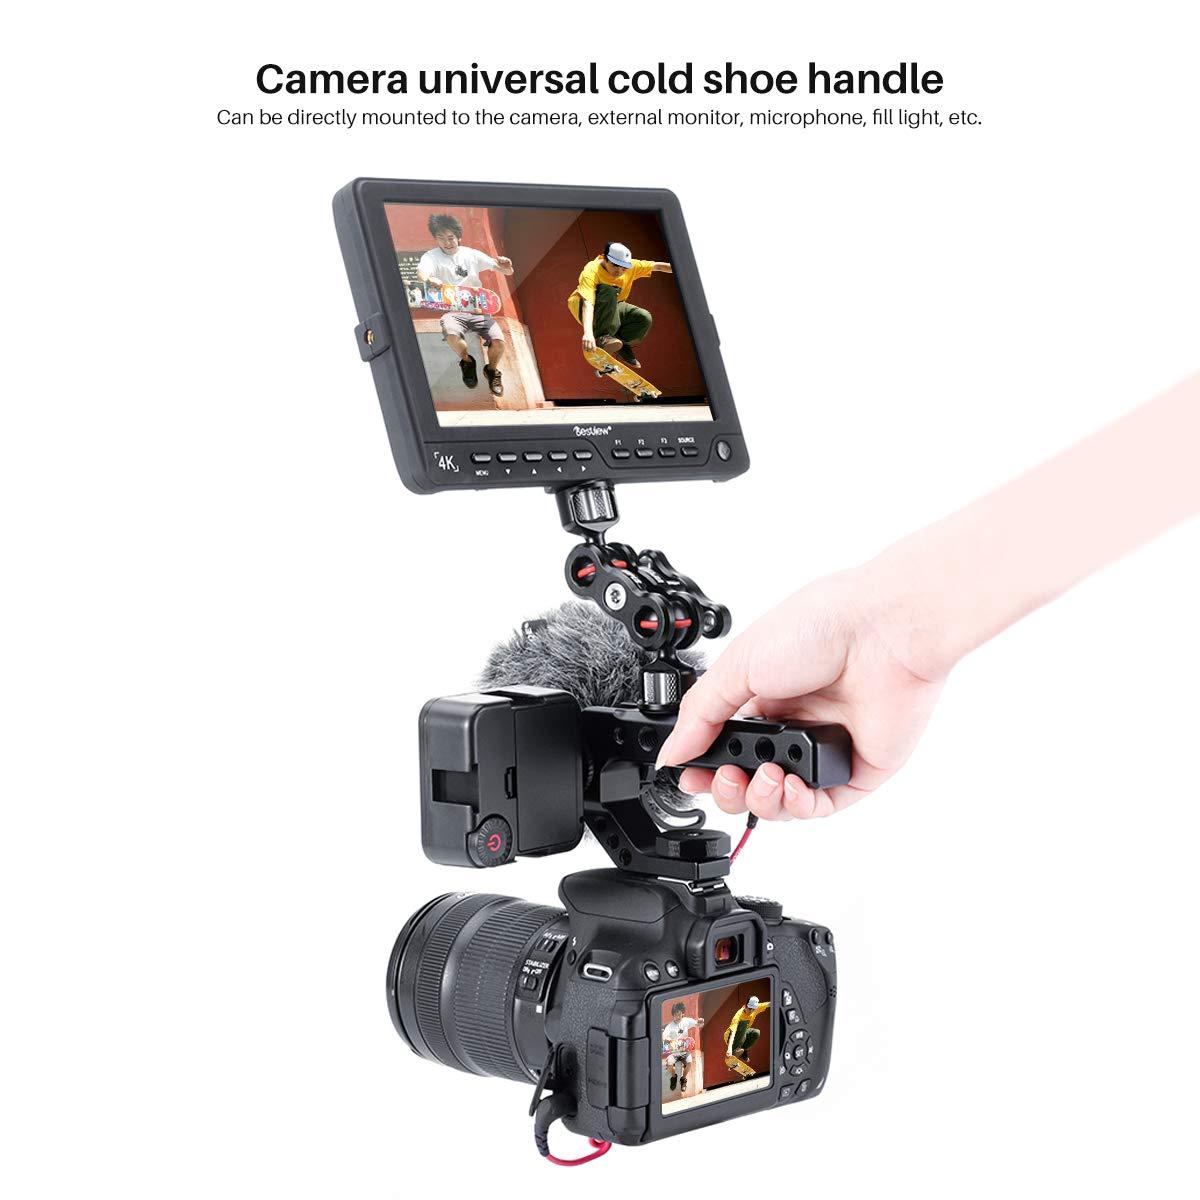 R005 Camera Top Handle Camera Top Cheese Handle Grip Universal Video Stabilizing Rig W 3 Cold Shoe Adapters to Mount Microphone, LED Light, Monitor, Easy Low Angle Shoots Metal